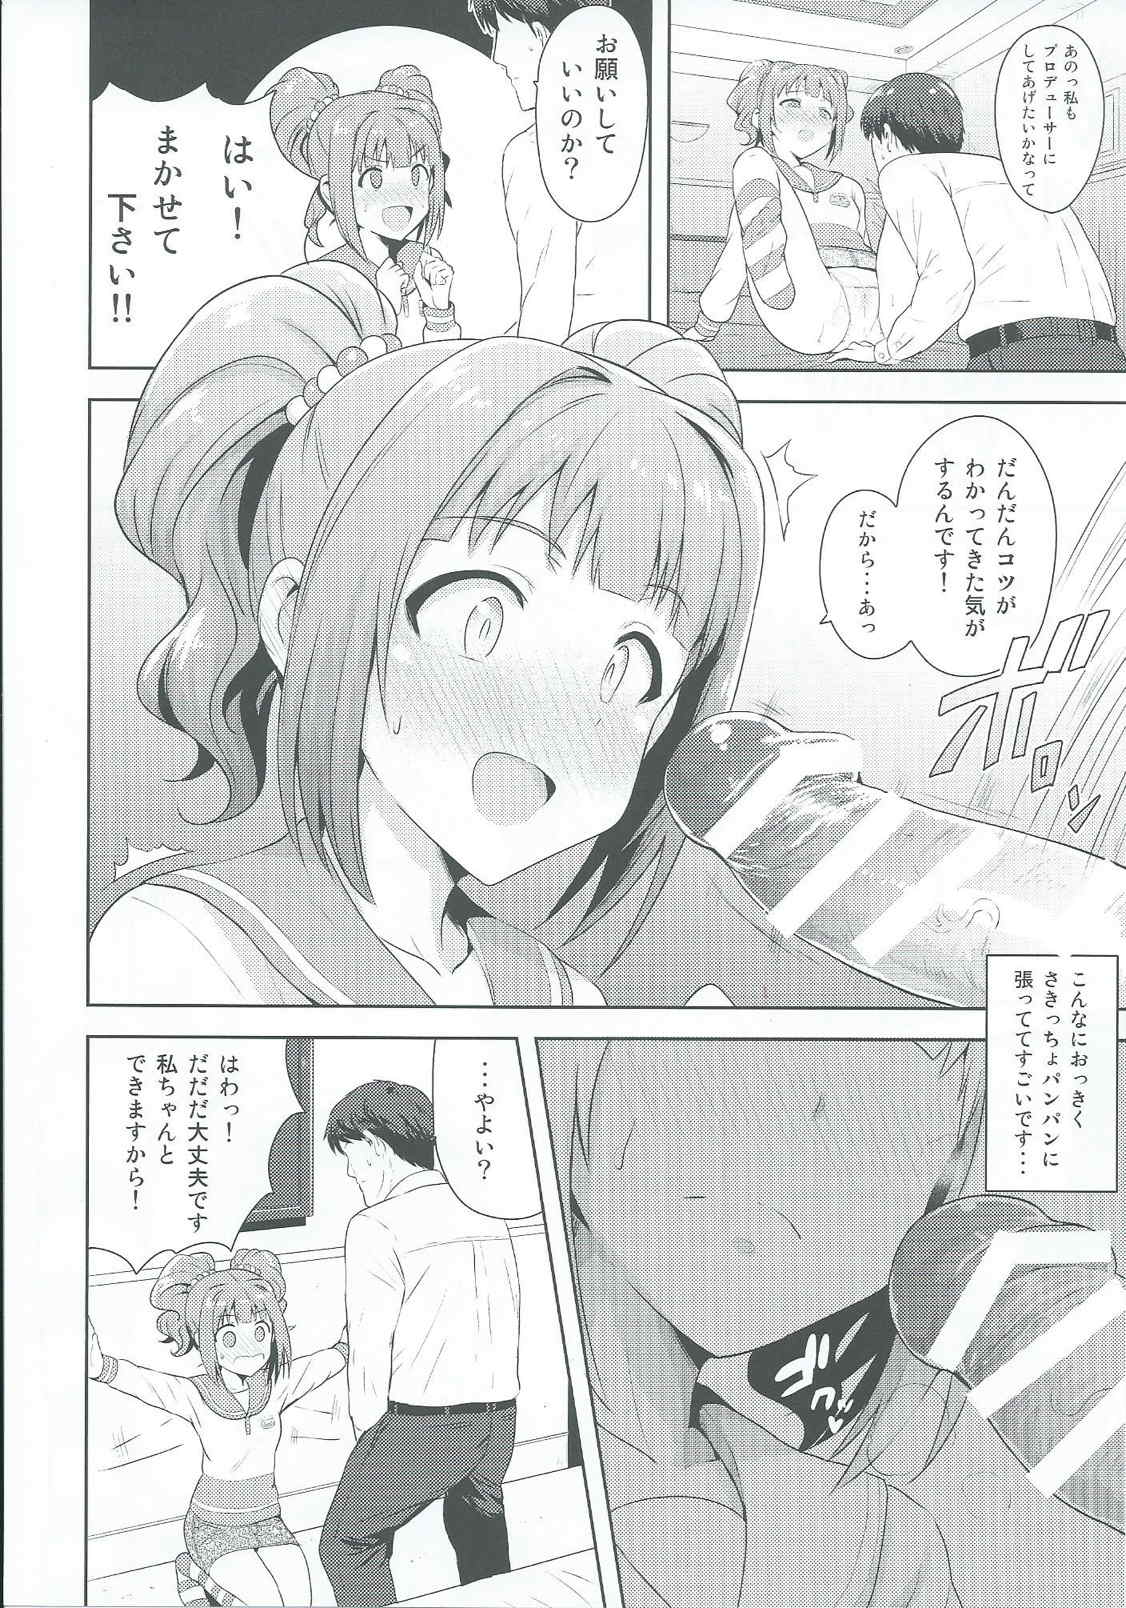 (iDOLPROJECT 13) [PLANT (Tsurui)] Yayoi to Issho 2 (THE IDOLM@STER) page 11 full